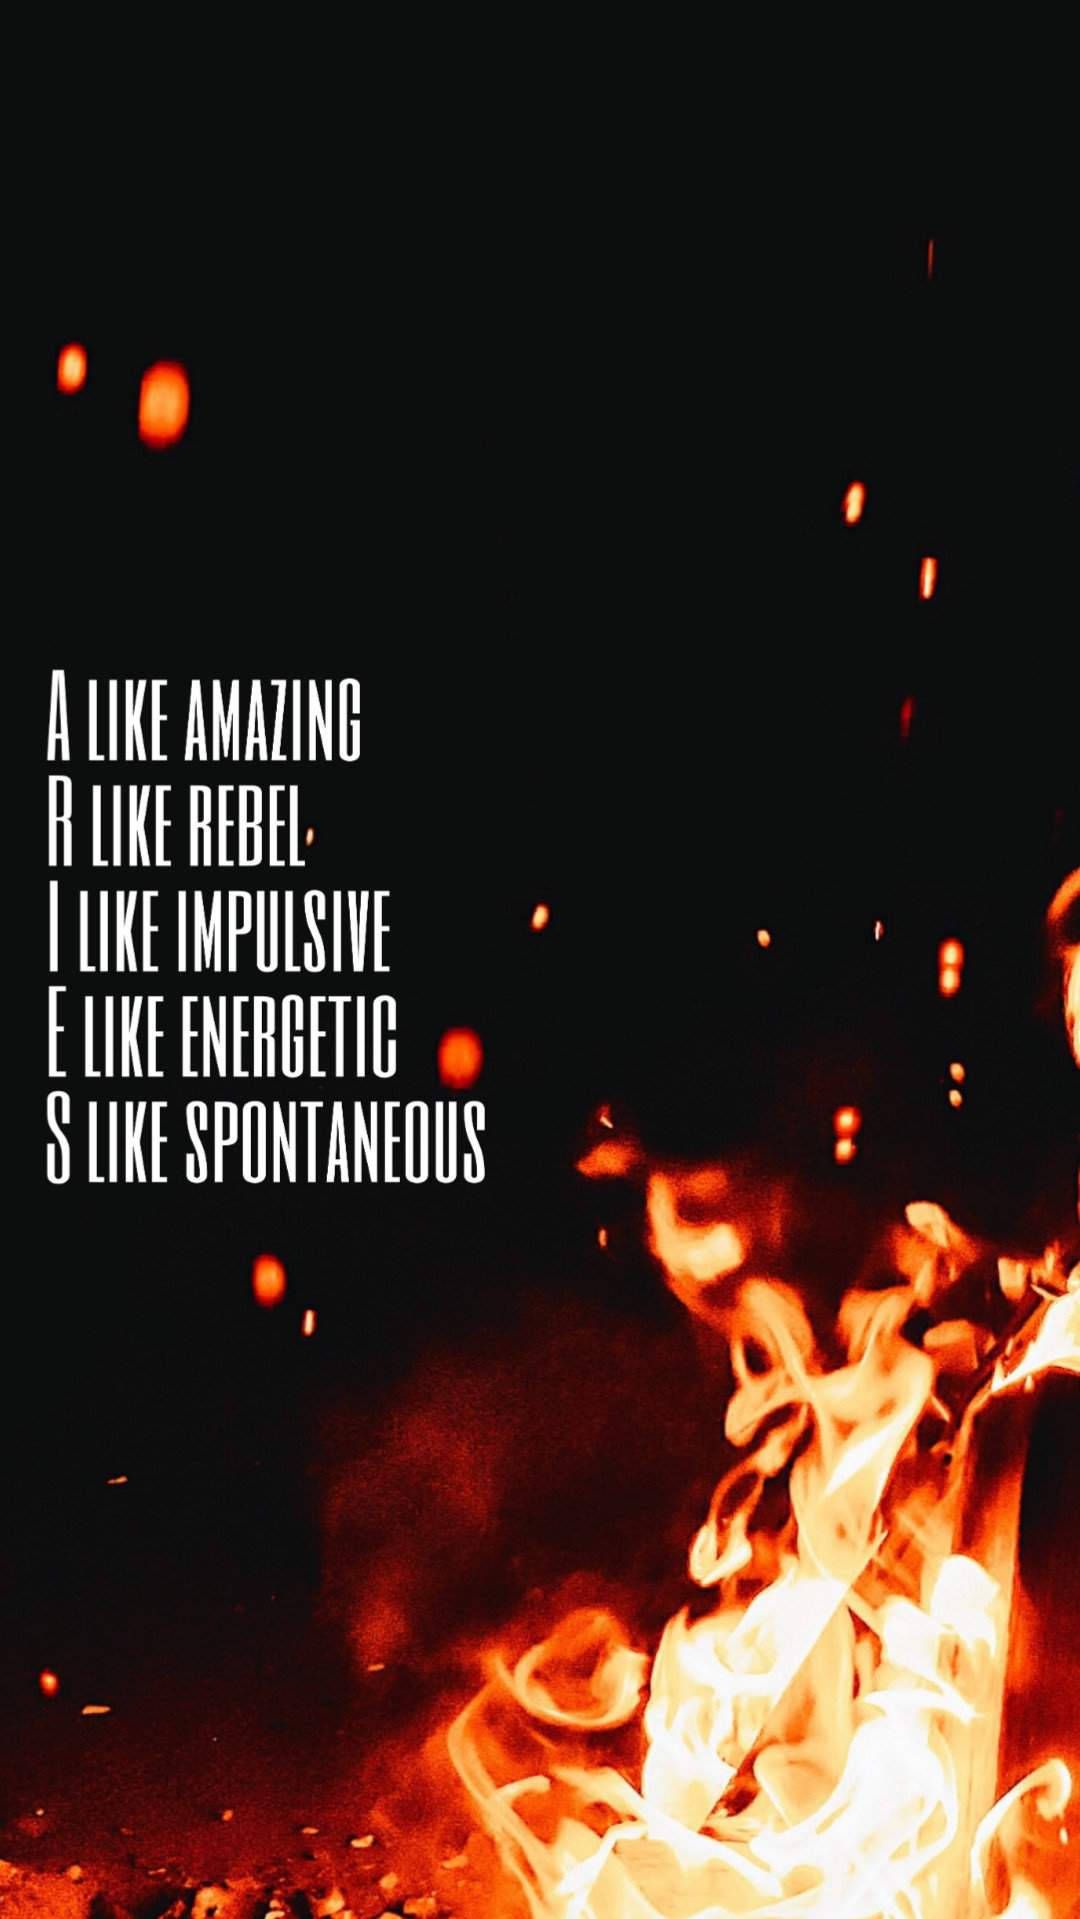 Download Aries Aesthetic Meaning With Fire Wallpaper